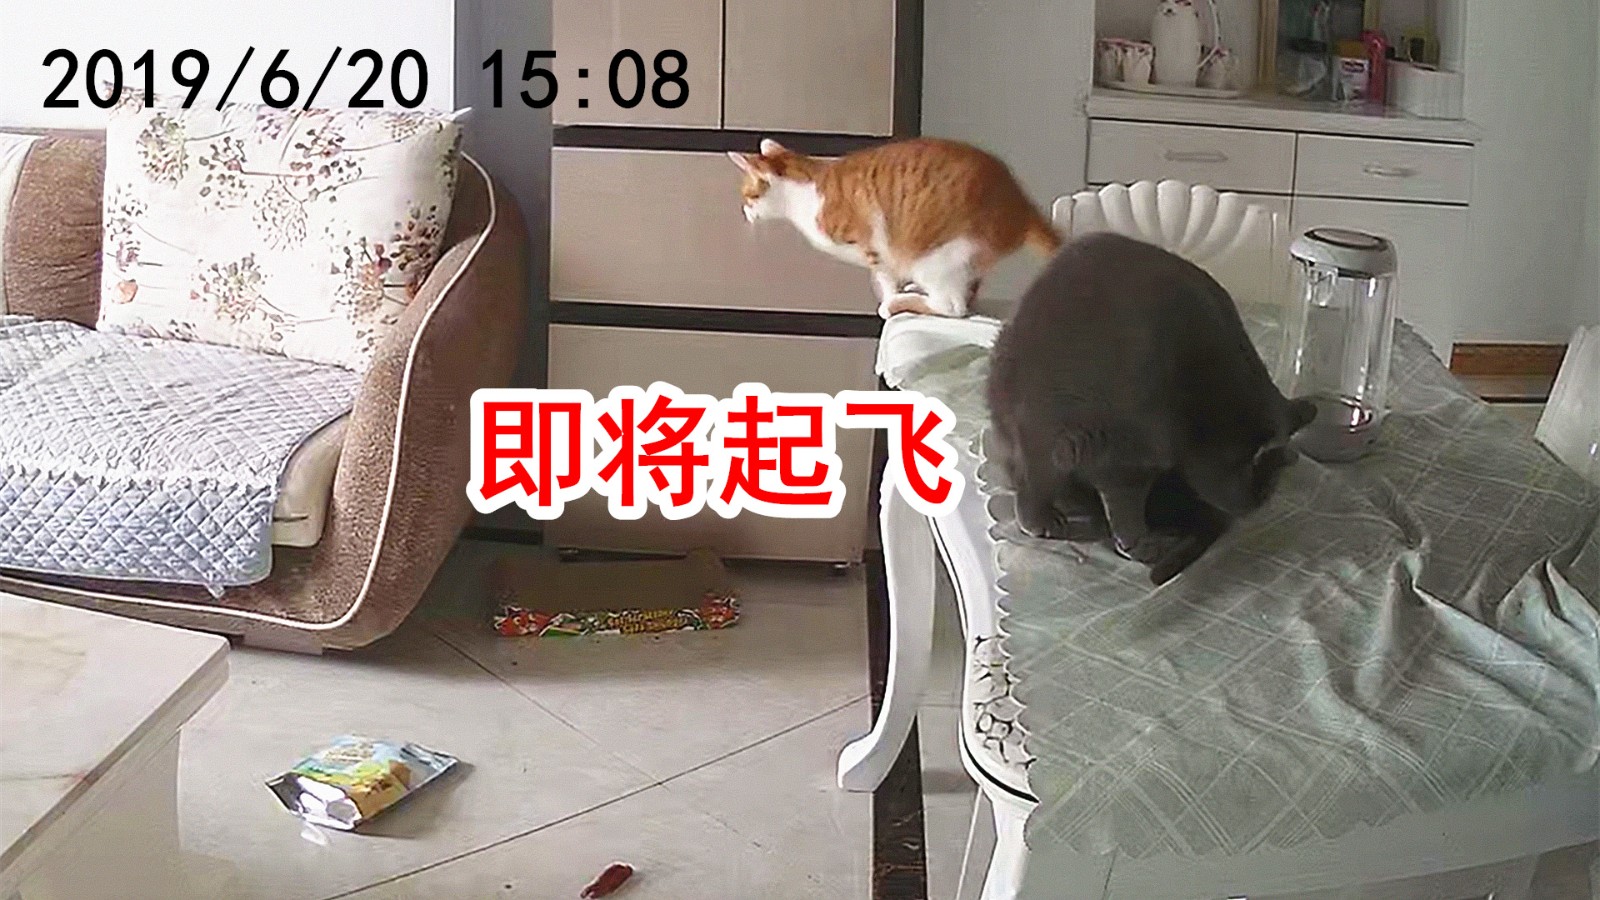 In order to prevent the cat from demolishing the house, the owner installed the monitor and saw the video pictures laughing goose barking.